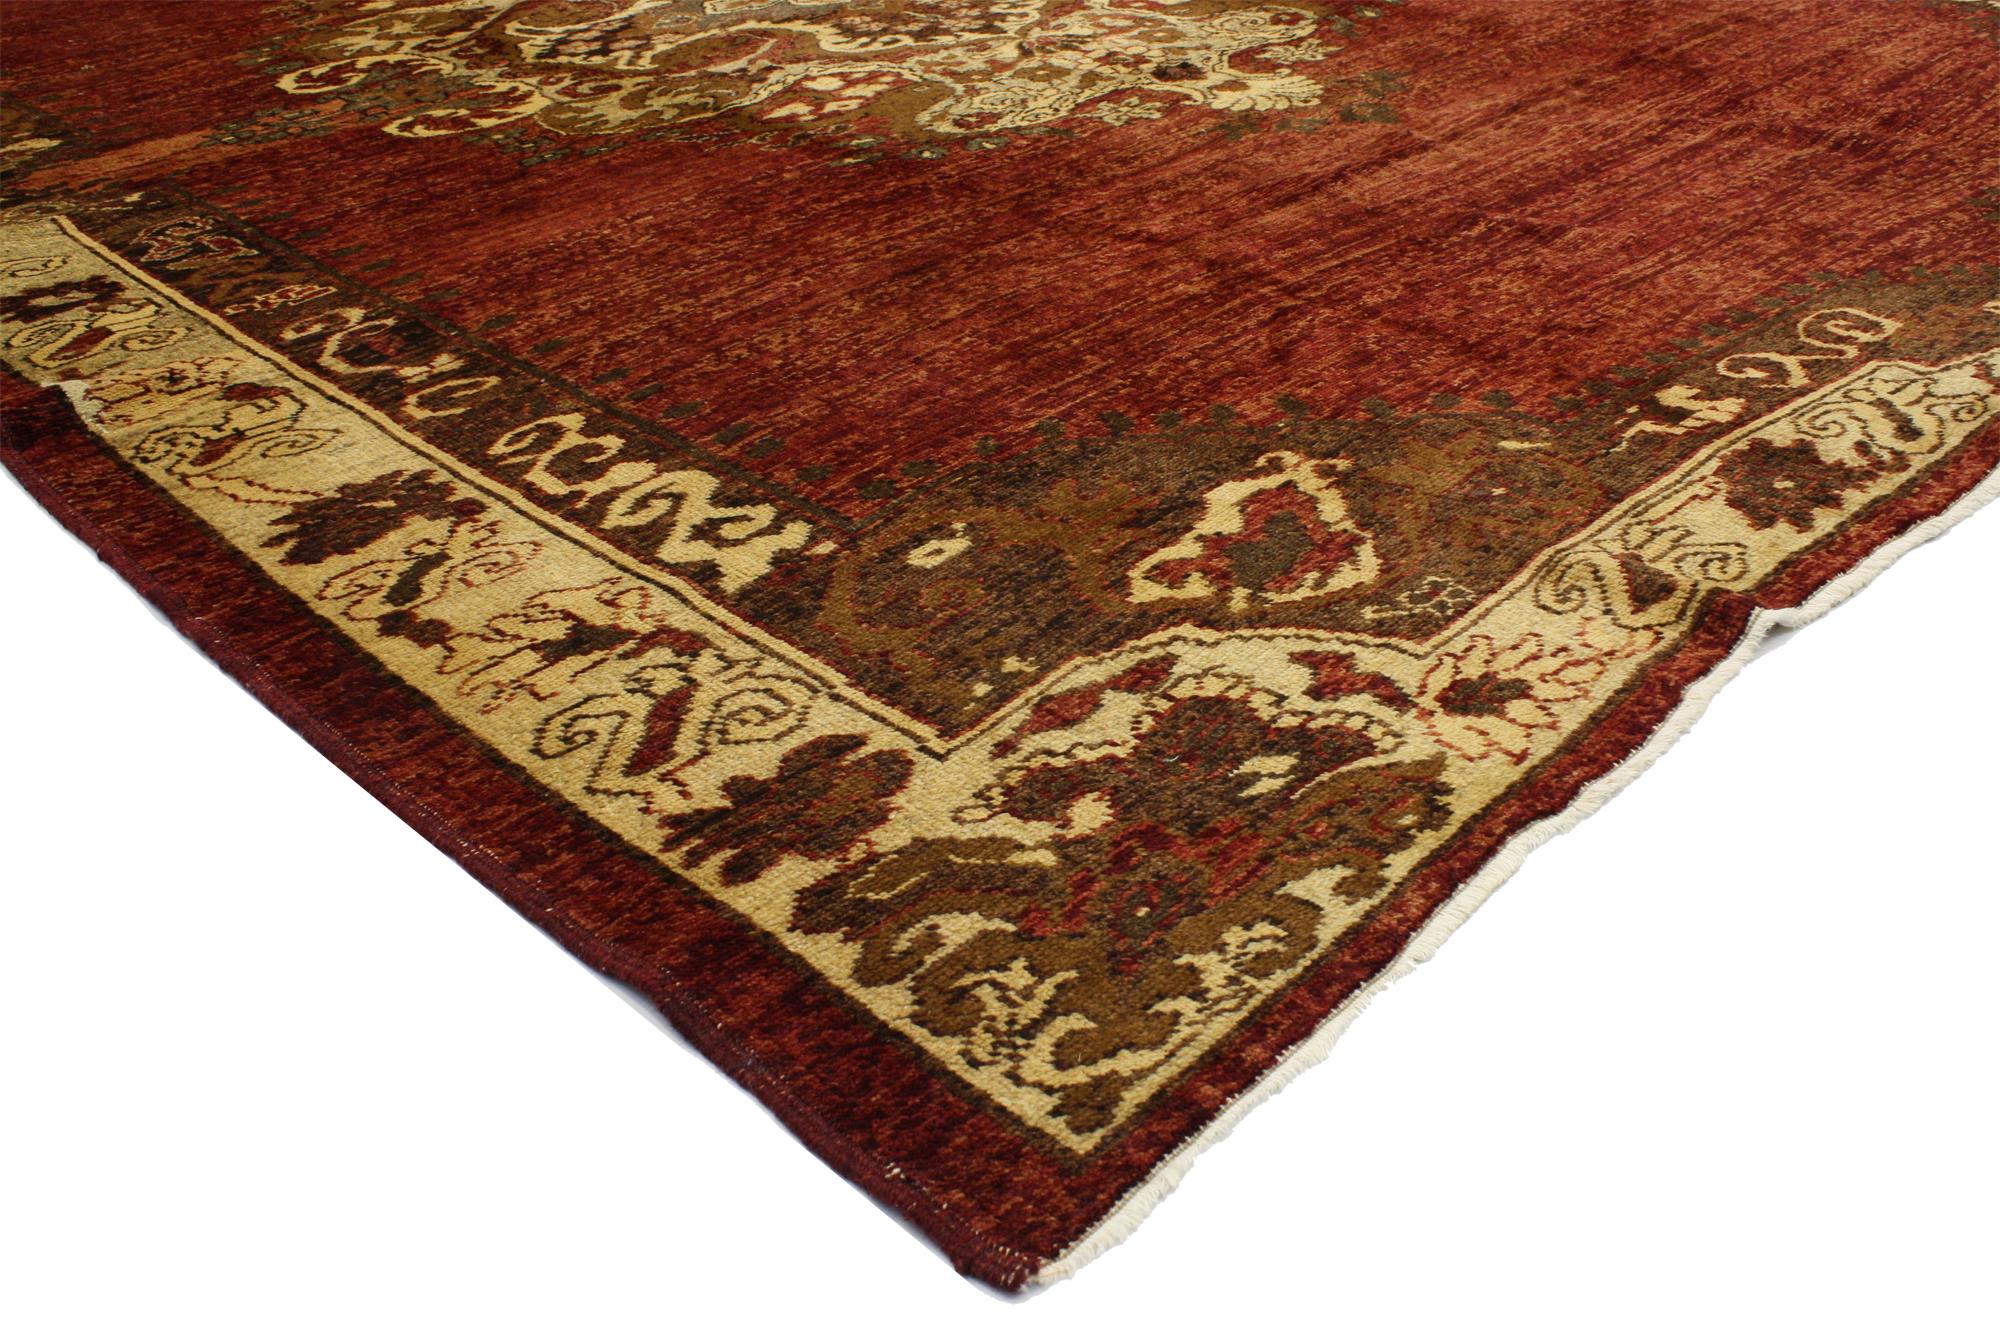 50562, vintage Turkish Oushak area rug with Luxe Medieval and Jacobean style. This hand knotted wool vintage Turkish Oushak rug features a large scale filigree medallion composed of leafy tendrils, rosettes, palmettes, curves sickle leaves, and a